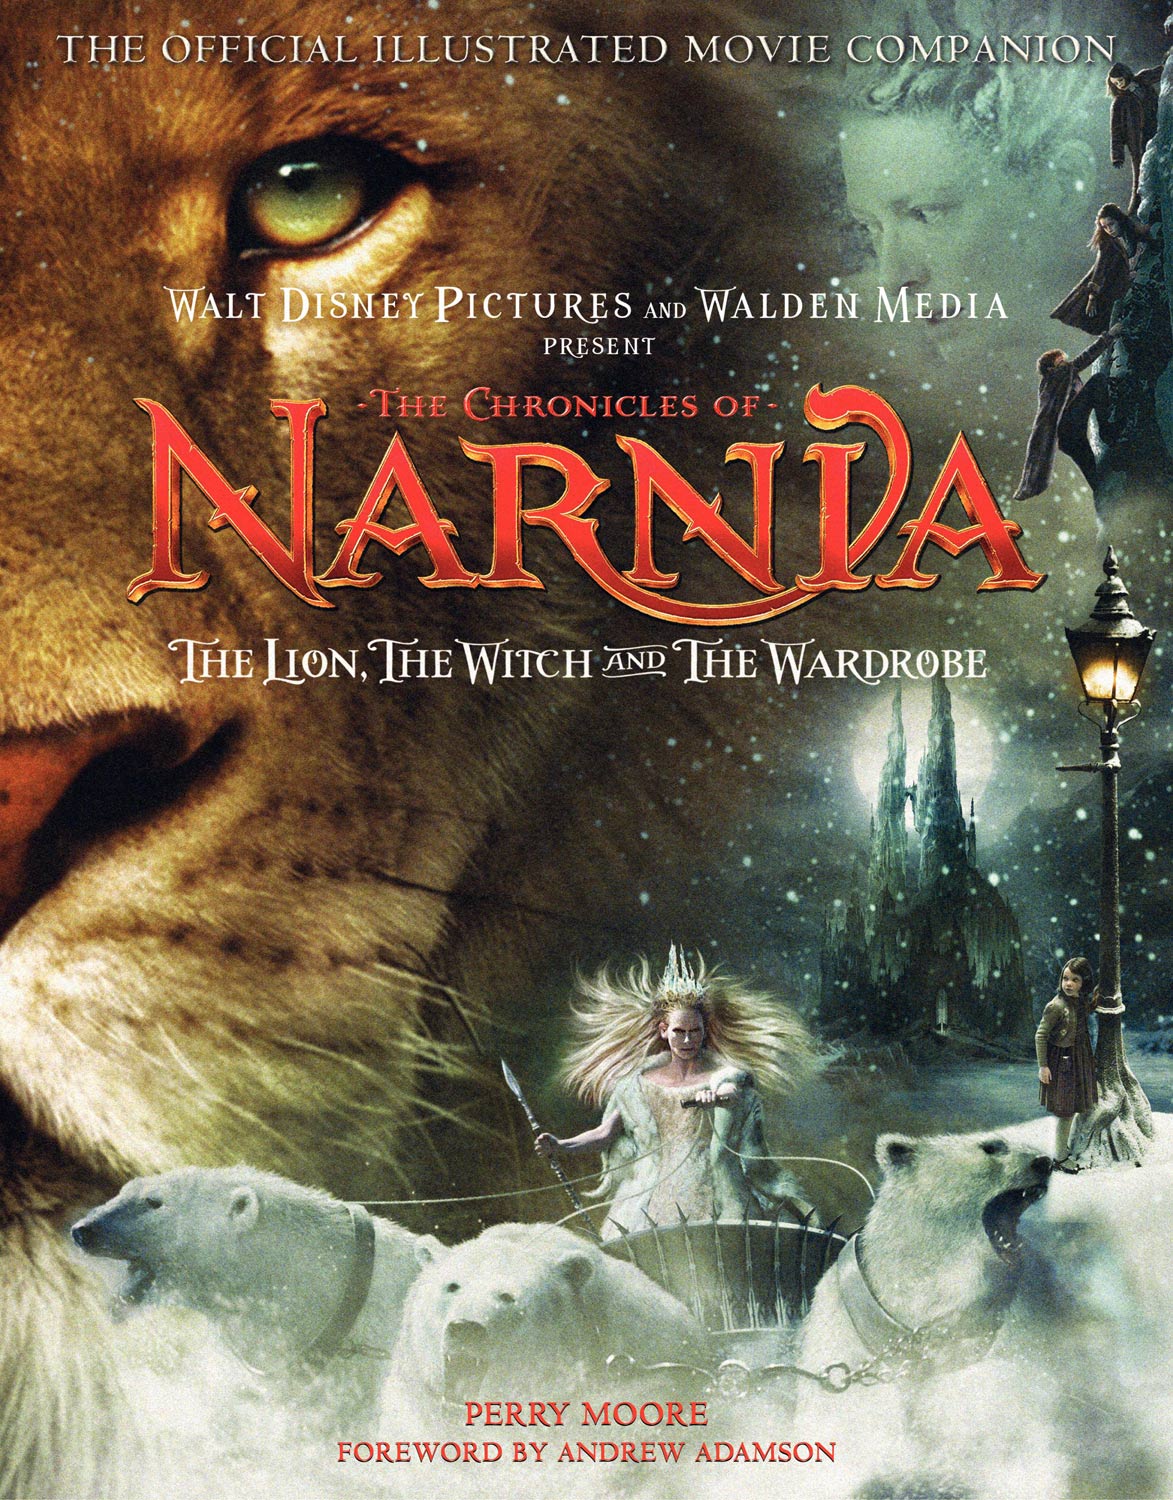 Official Movie Companion To Be Released - NarniaWeb | Netflix's Narnia ...